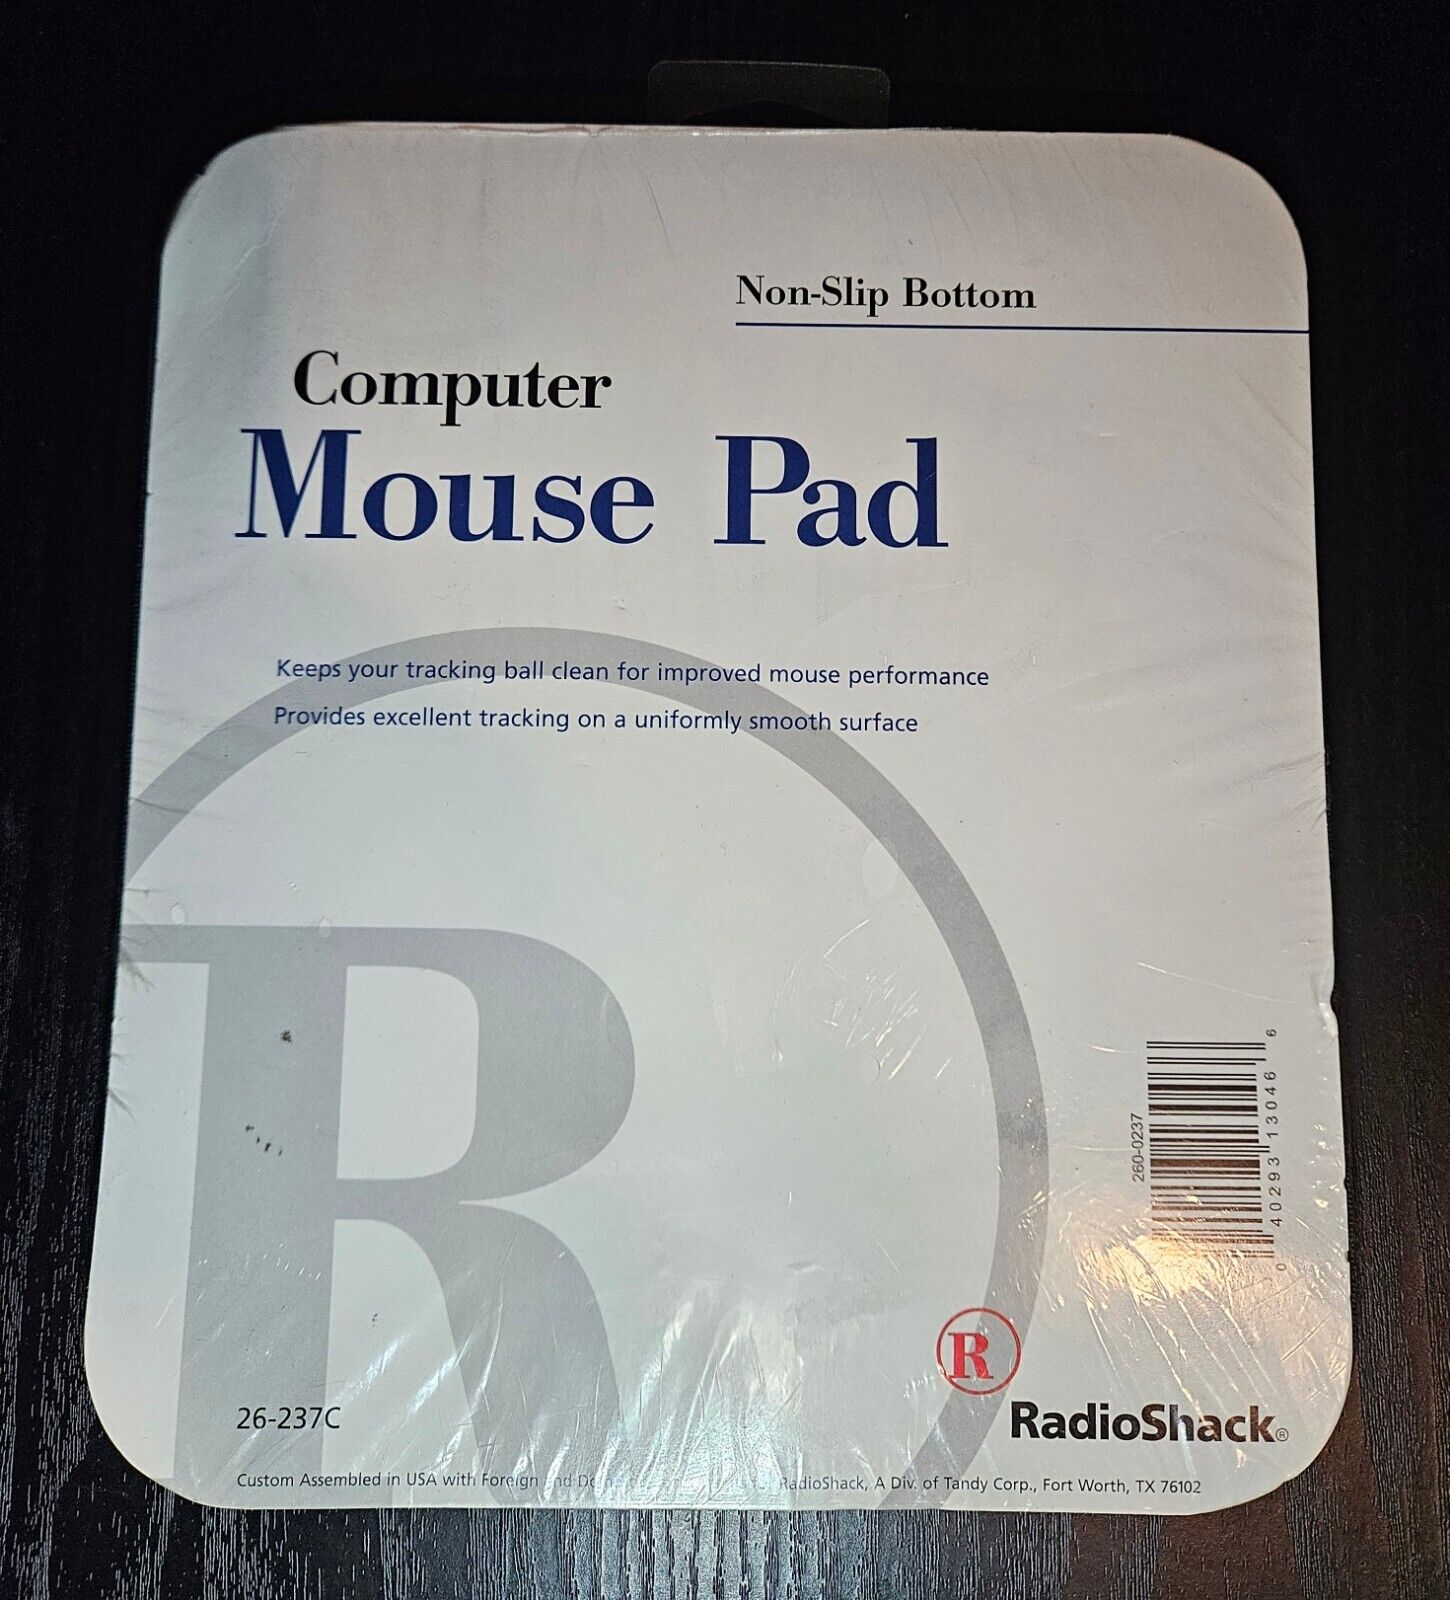 Vintage Radio Shack Mouse Pad, Non-Slip Bottom, 26-237C Tandy. New Old Stock